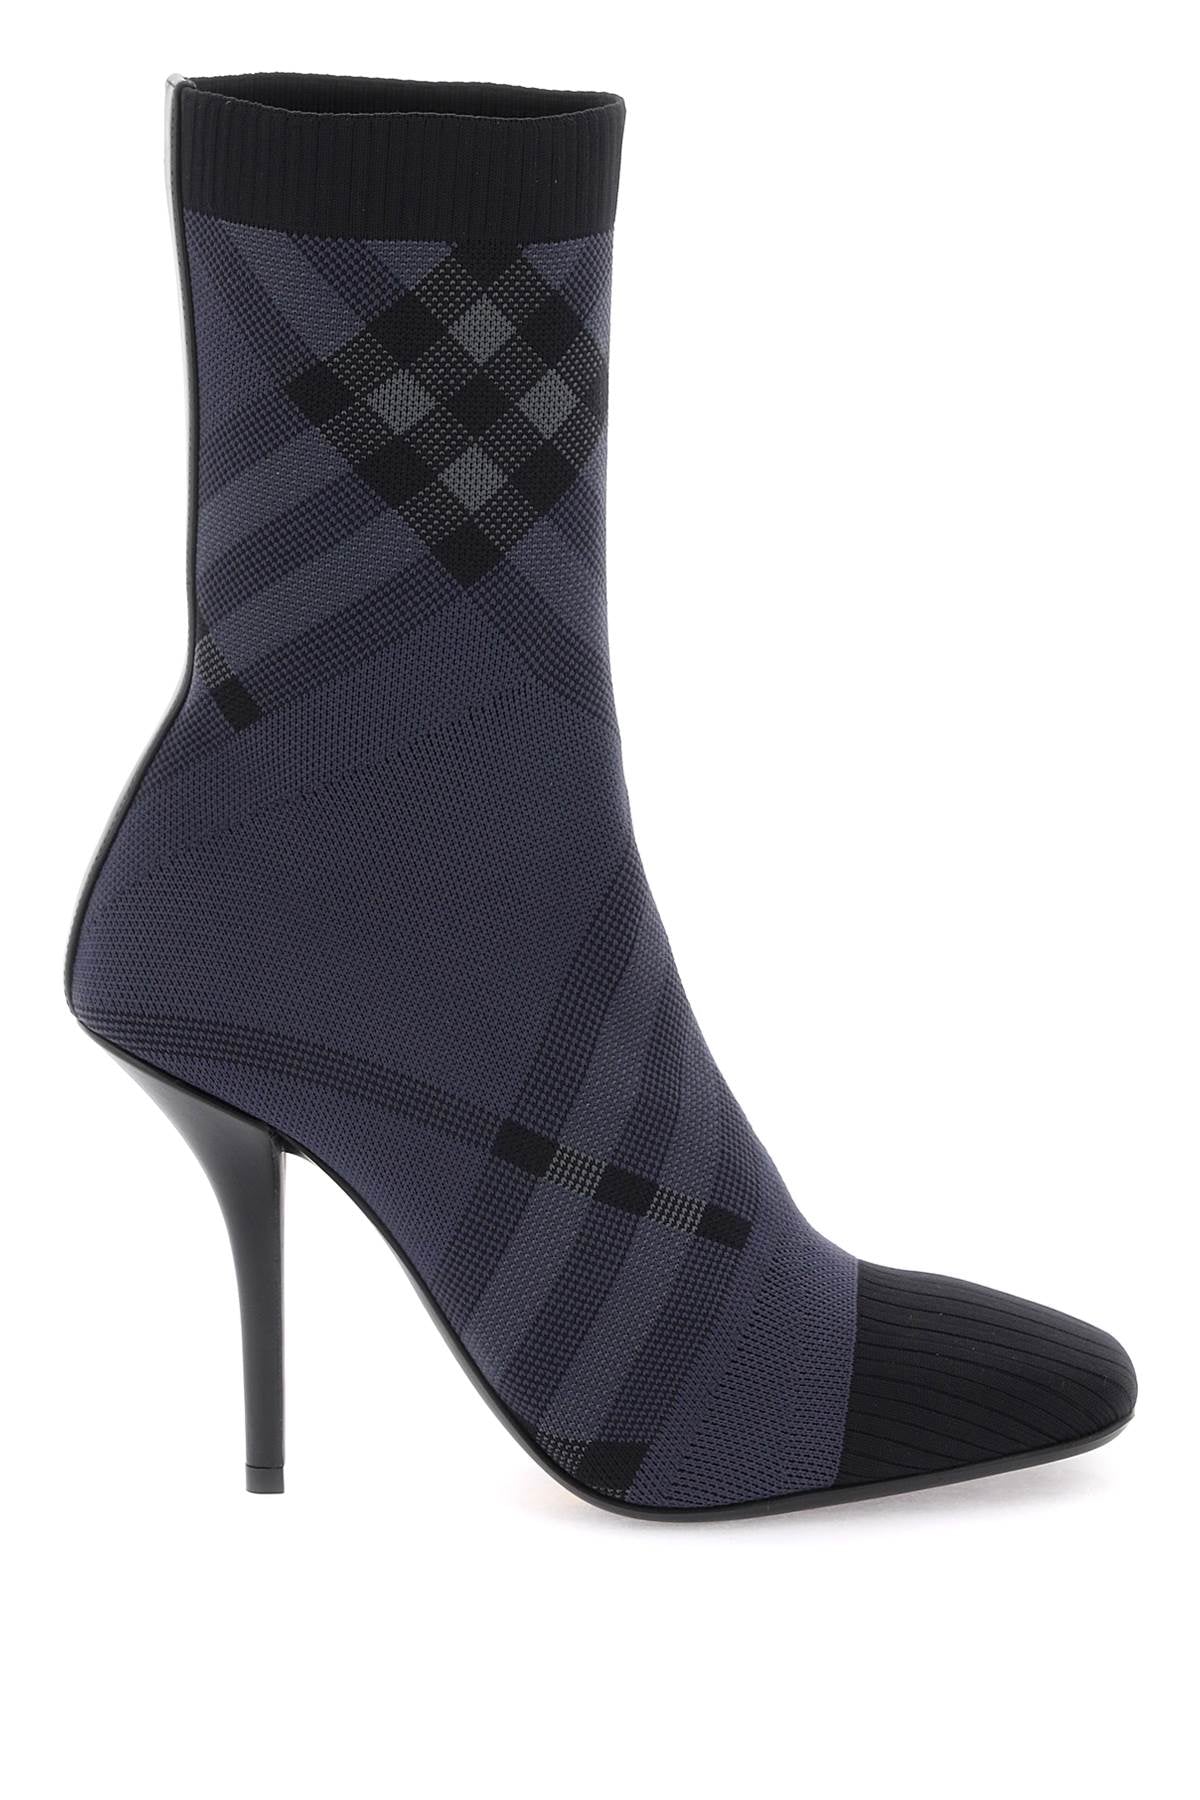 Burberry Check Knit Ankle Boots   Grigio